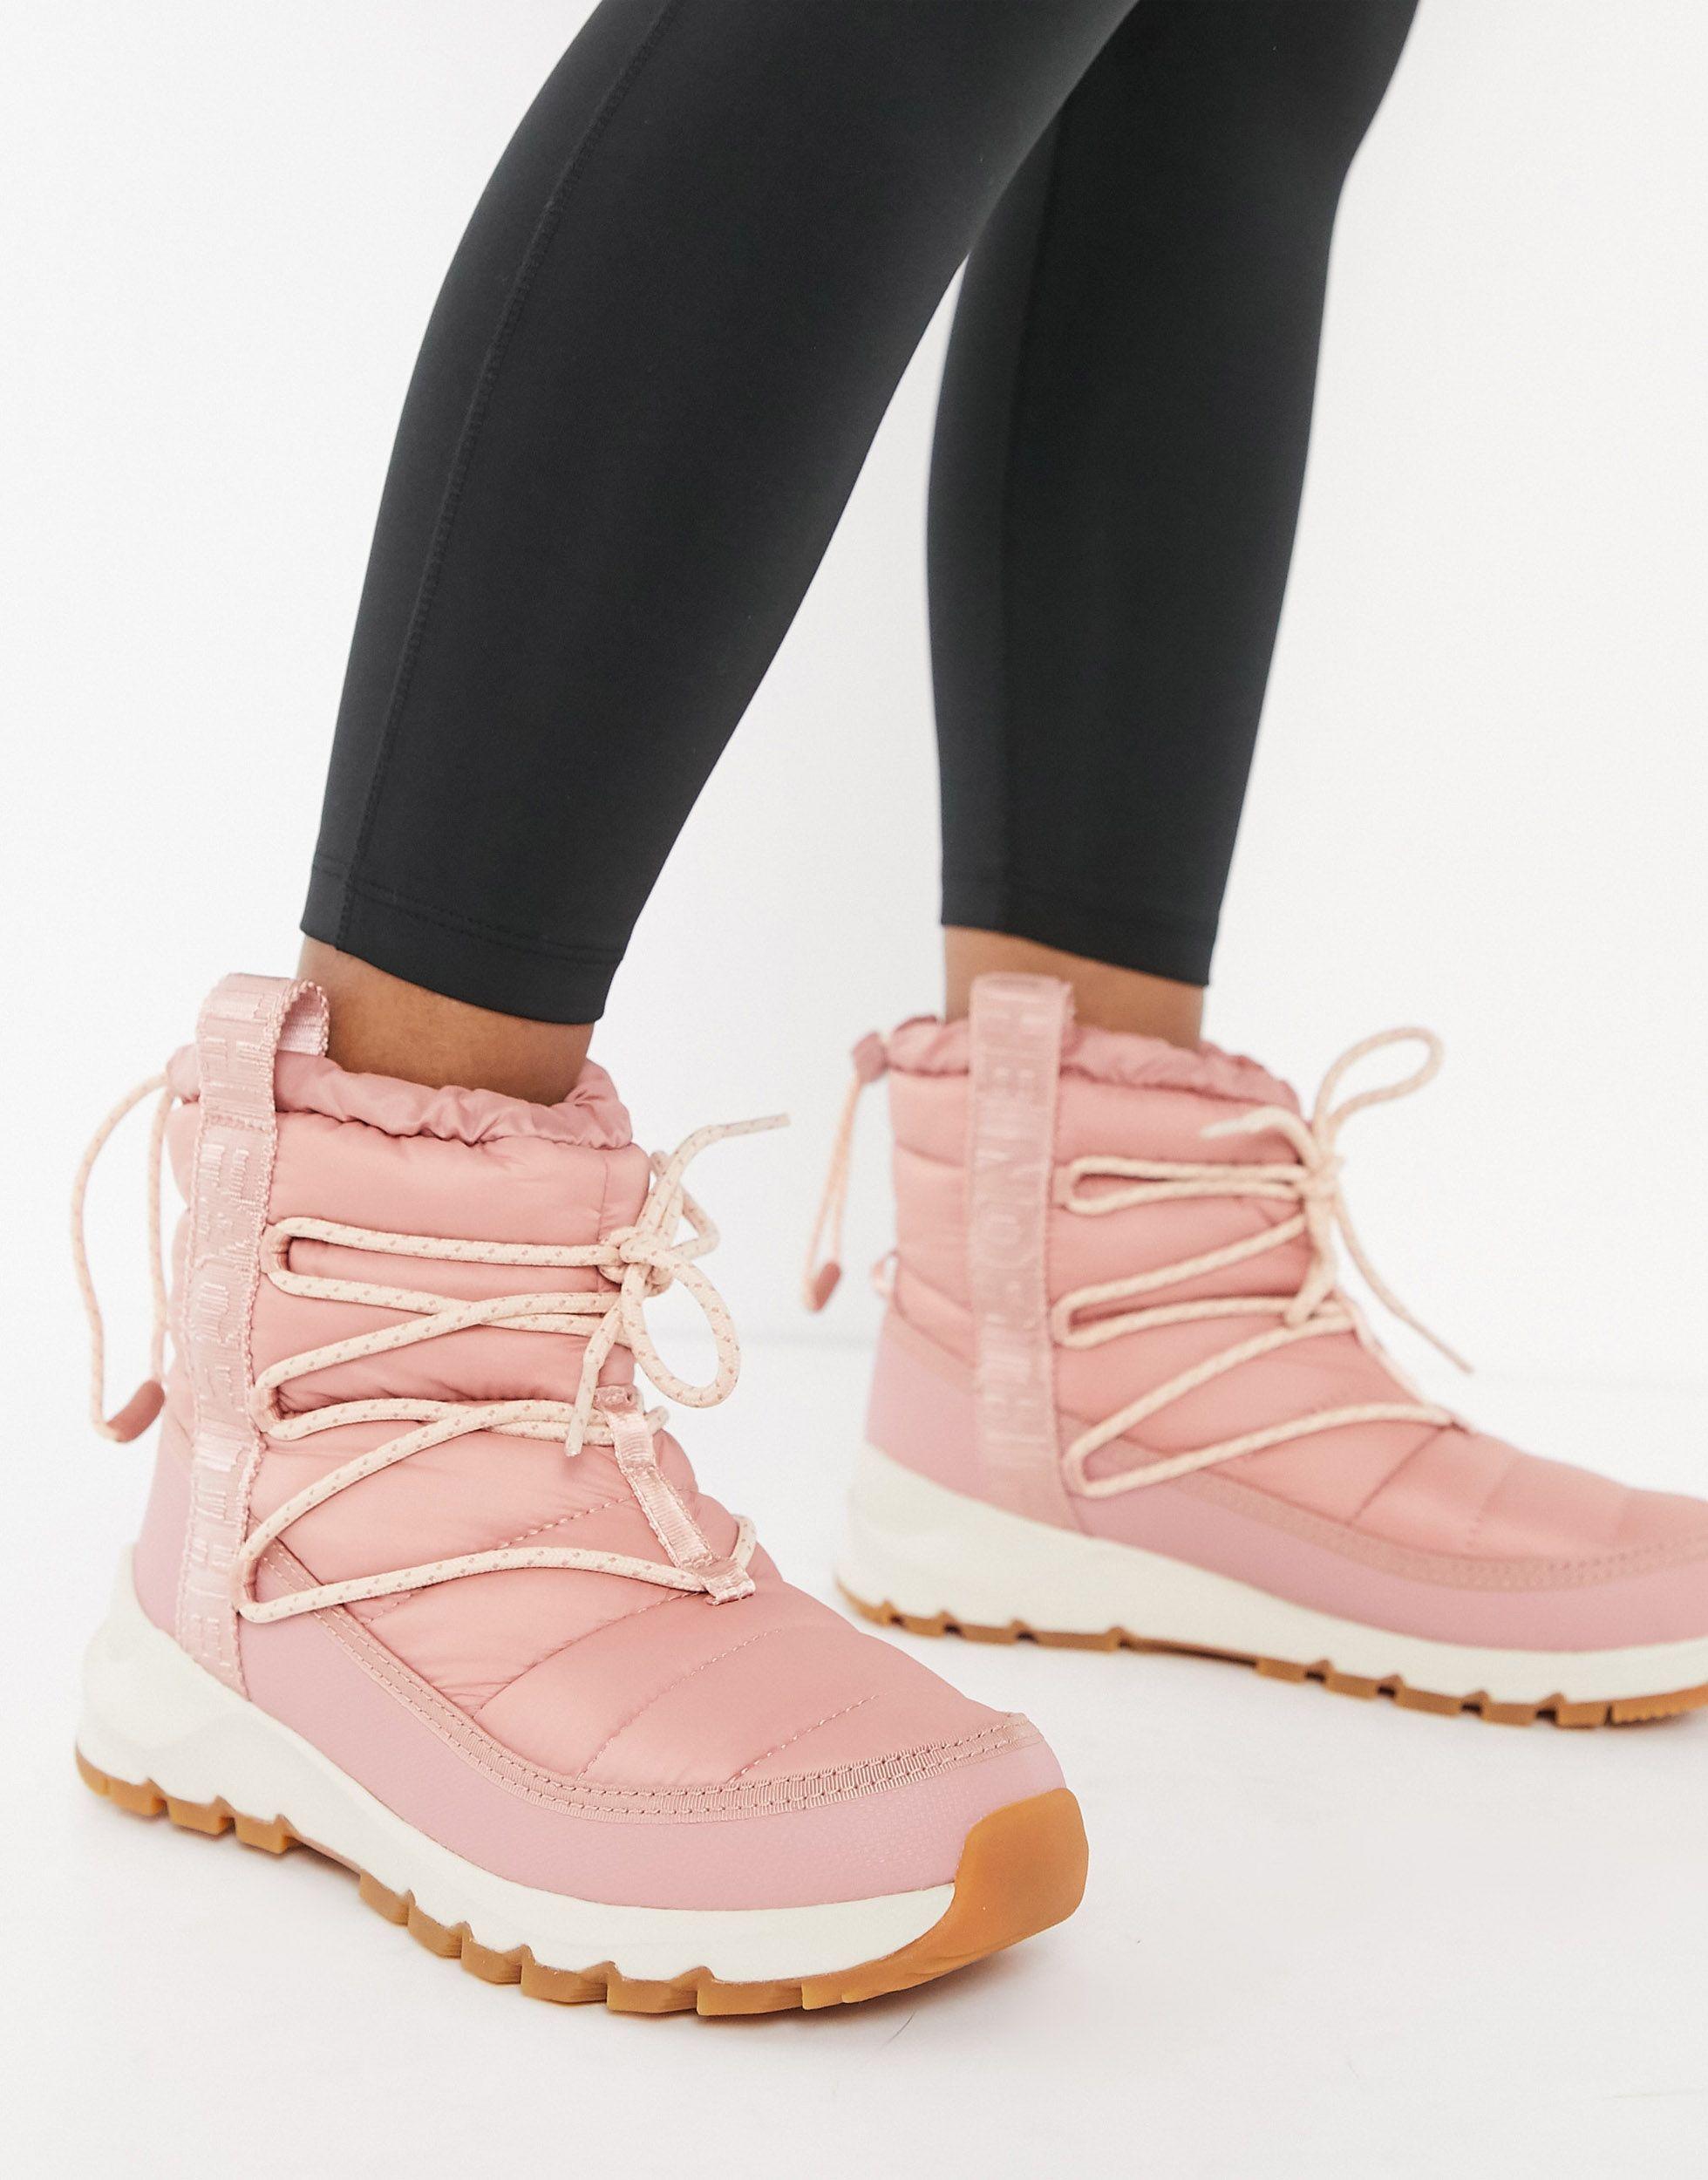 Satisfy leave Repair possible The North Face Thermoball Boot in Pink | Lyst